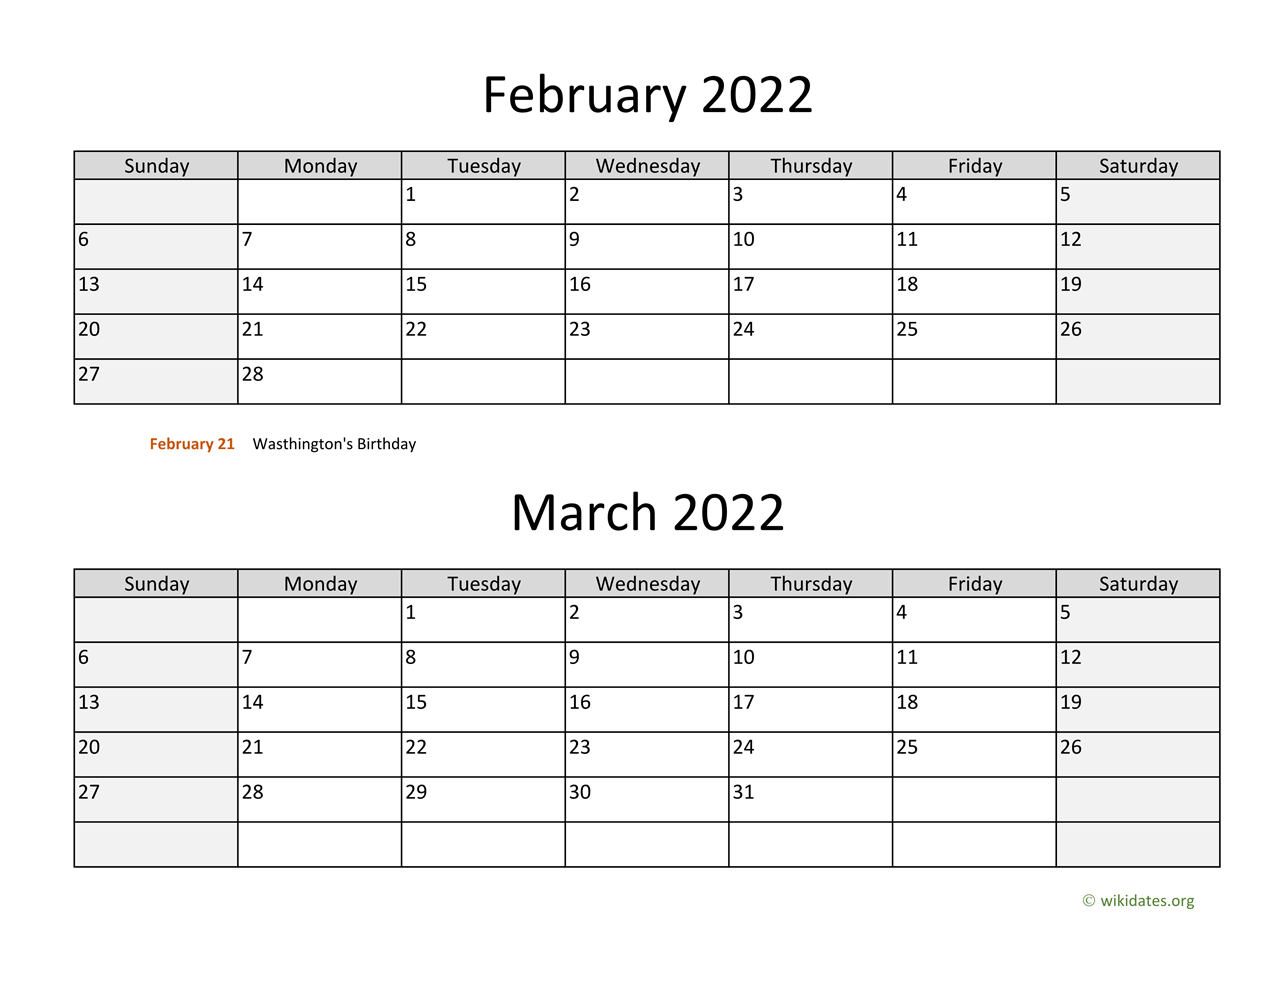 Feb And March 2022 Calendar February And March 2022 Calendar | Wikidates.org